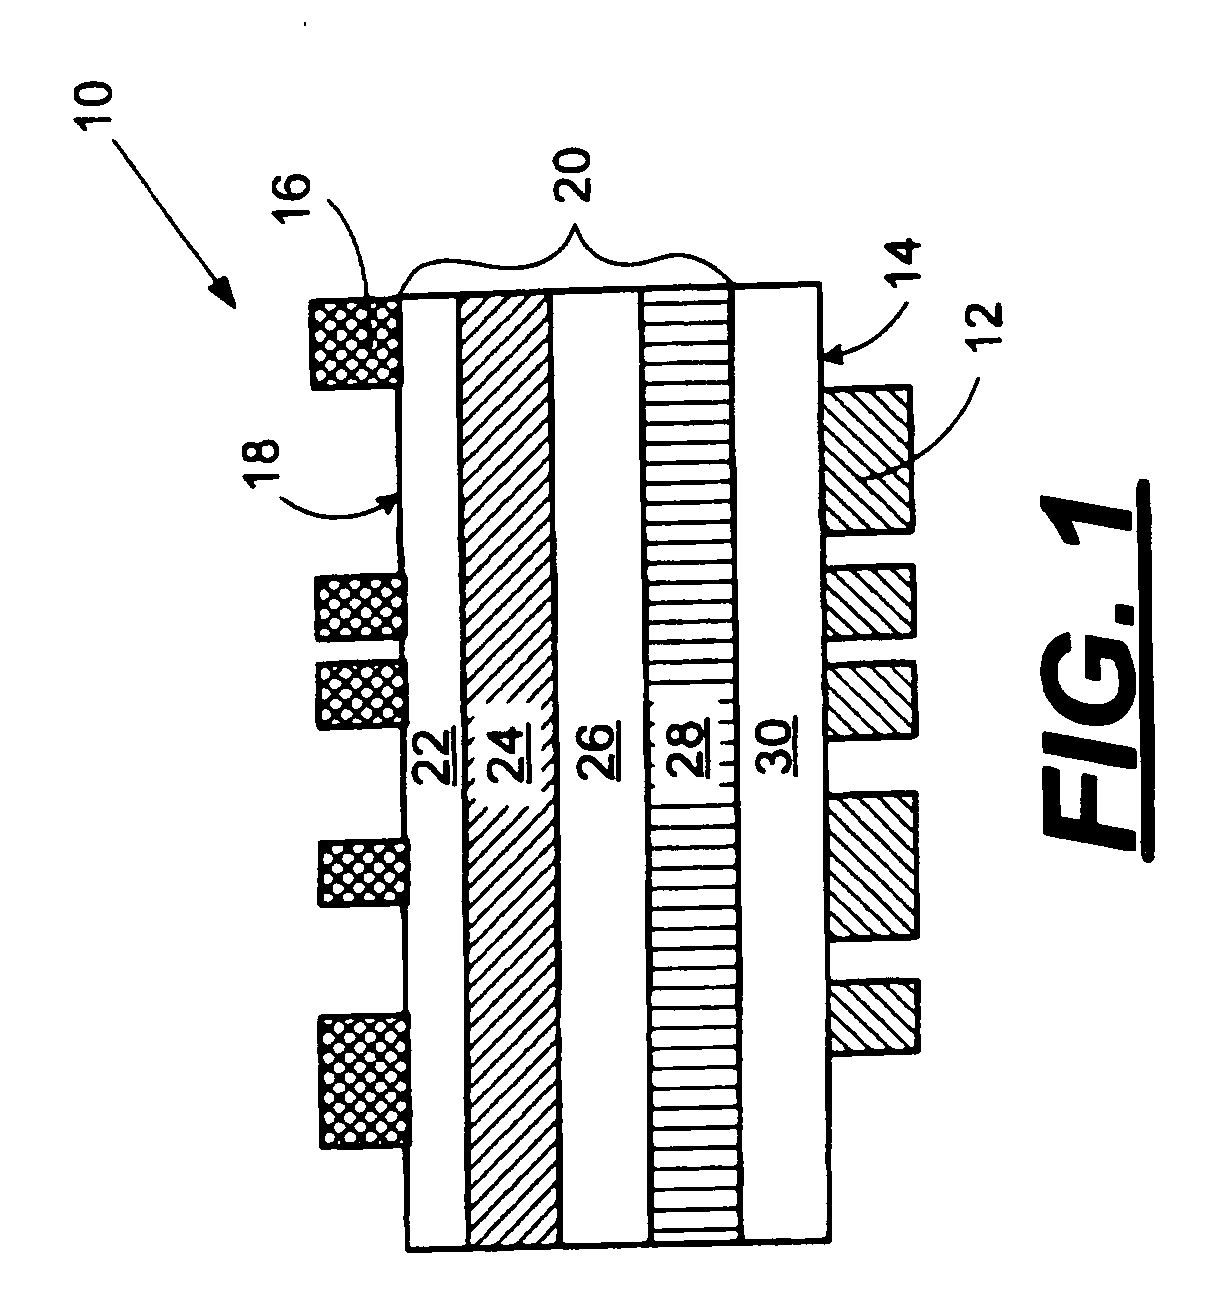 Electroluminescent display system